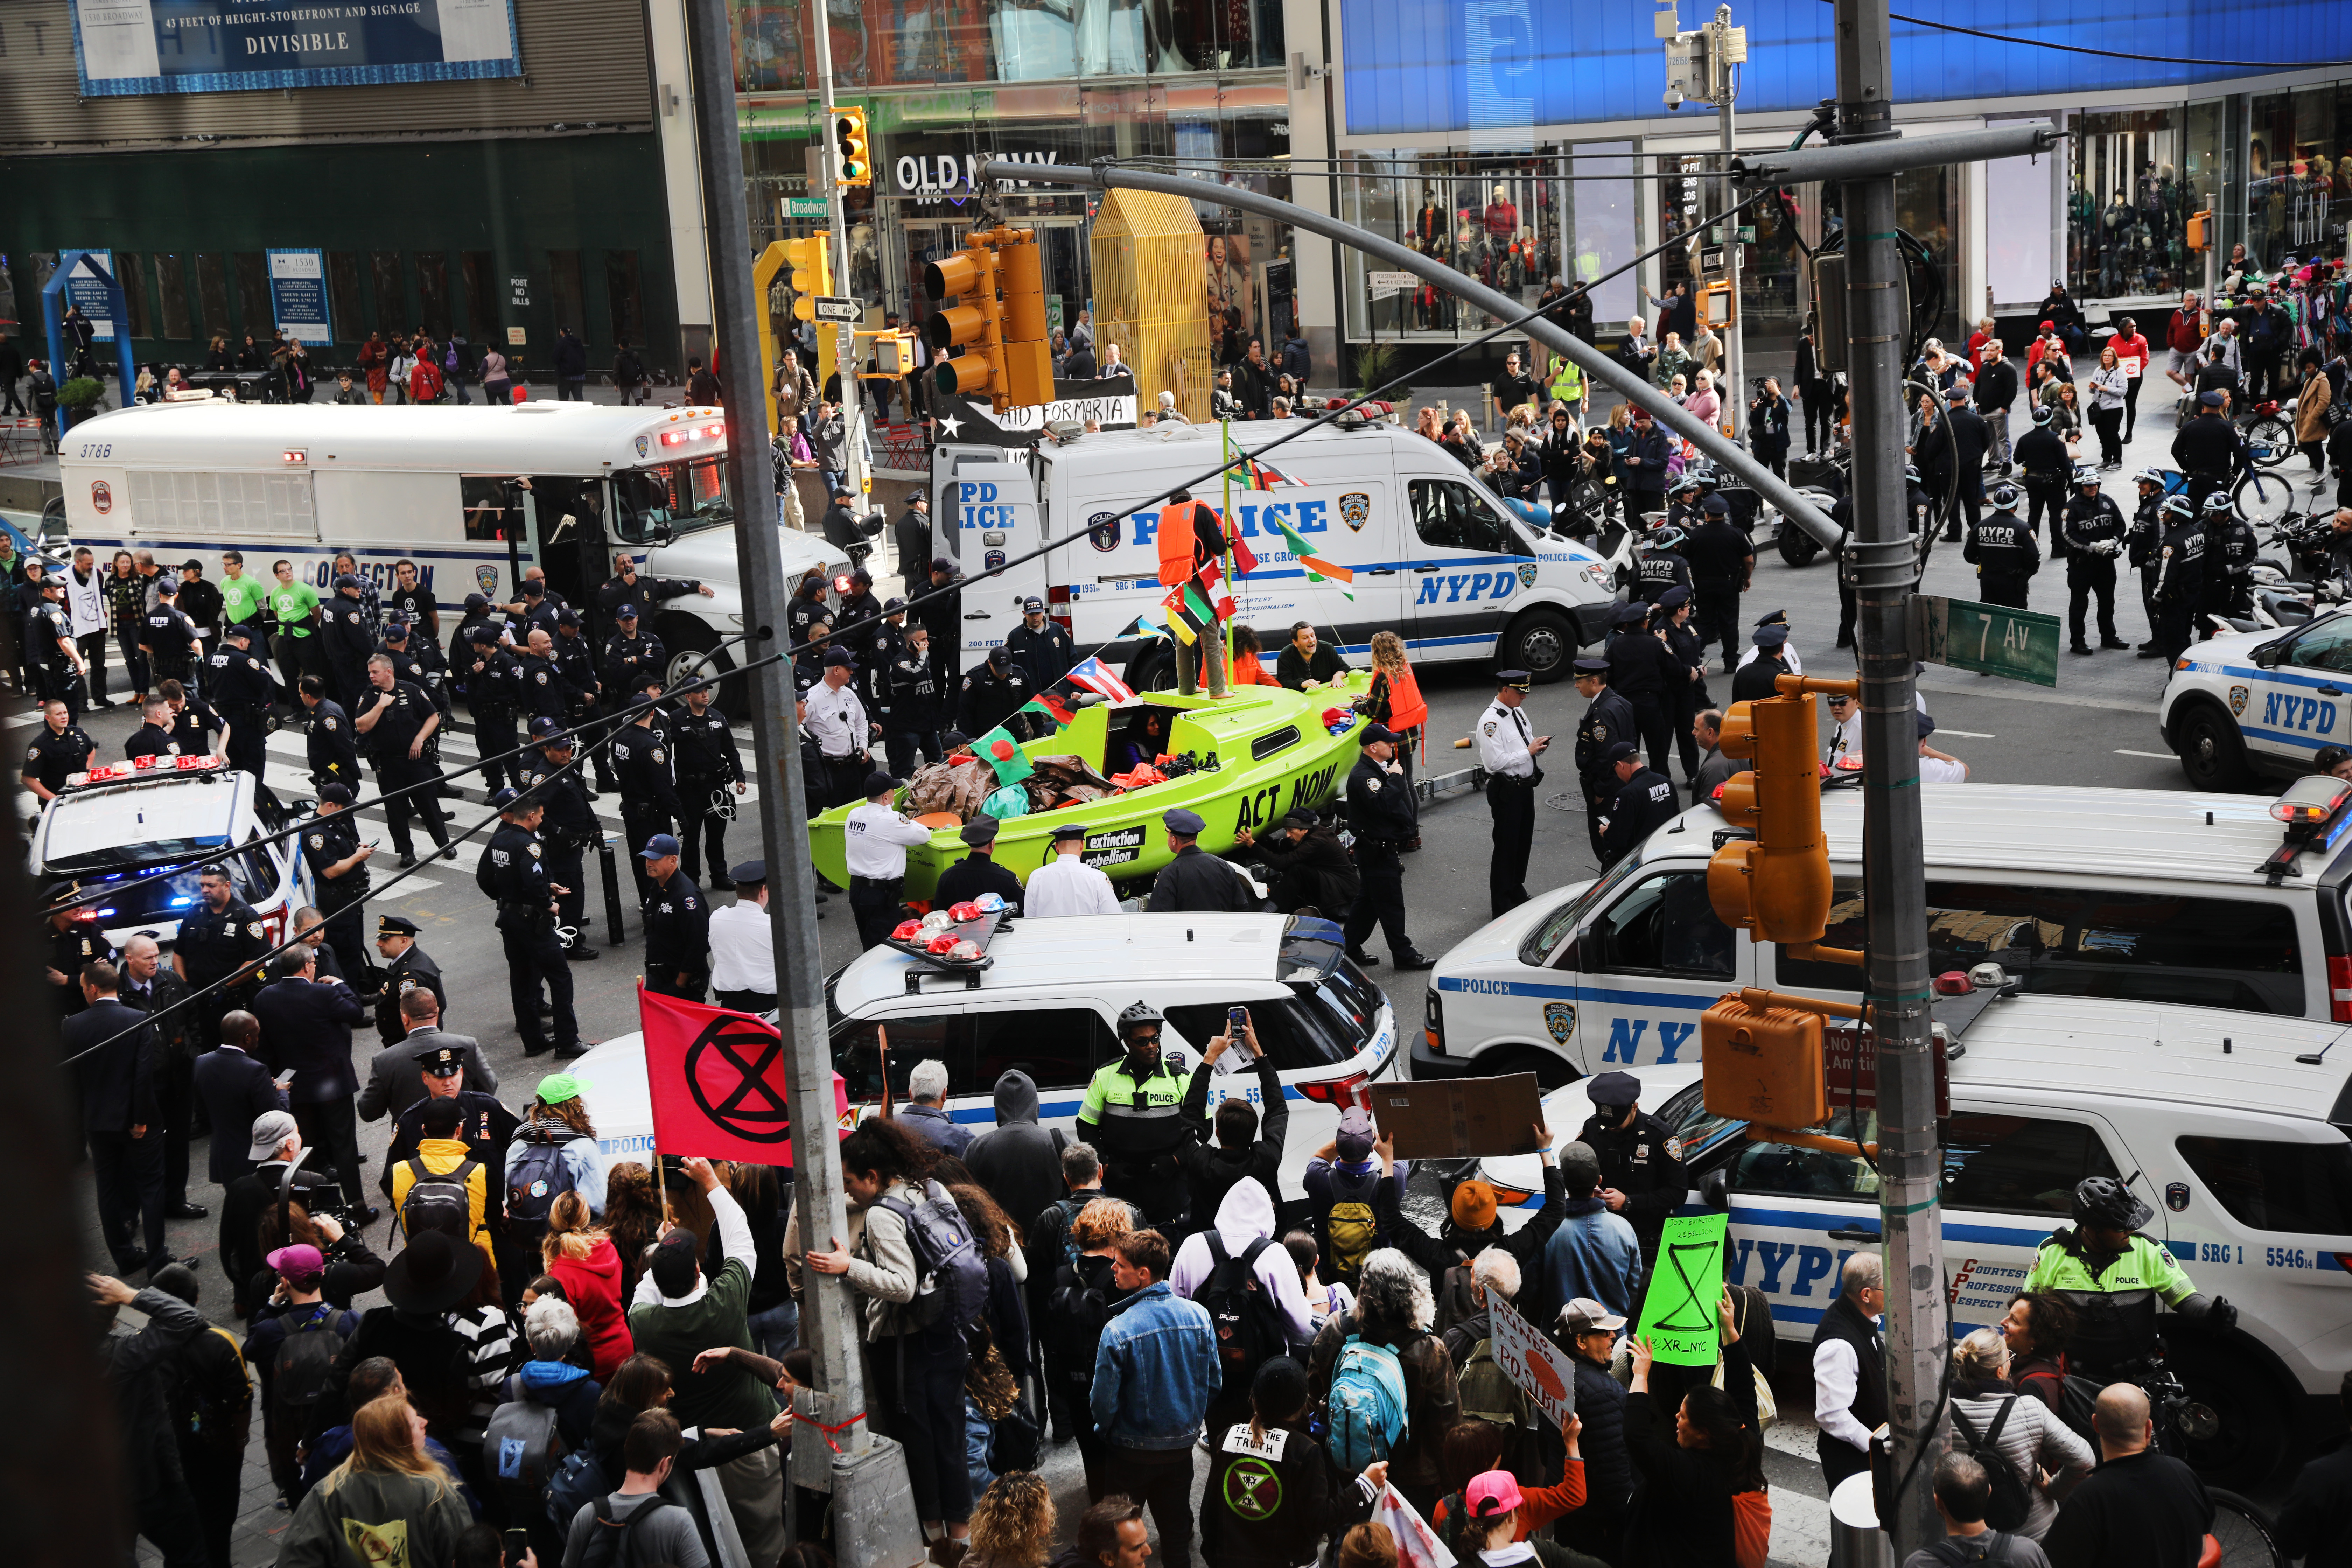 NEW YORK, NEW YORK - OCTOBER 10: Police gather around a small sailboat that was dropped off in Times Square as part of a protest by the environmental group Extinction Rebellion on October 10, 2019 in New York City. As tourists and New Yorkers watched, dozens of people were arrested as the climate change protesters blocked traffic in the busy center of Manhattan. The group is protesting climate change all week throughout the New York City and numerous other locations around the world. (Photo by Spencer Platt/Getty Images)